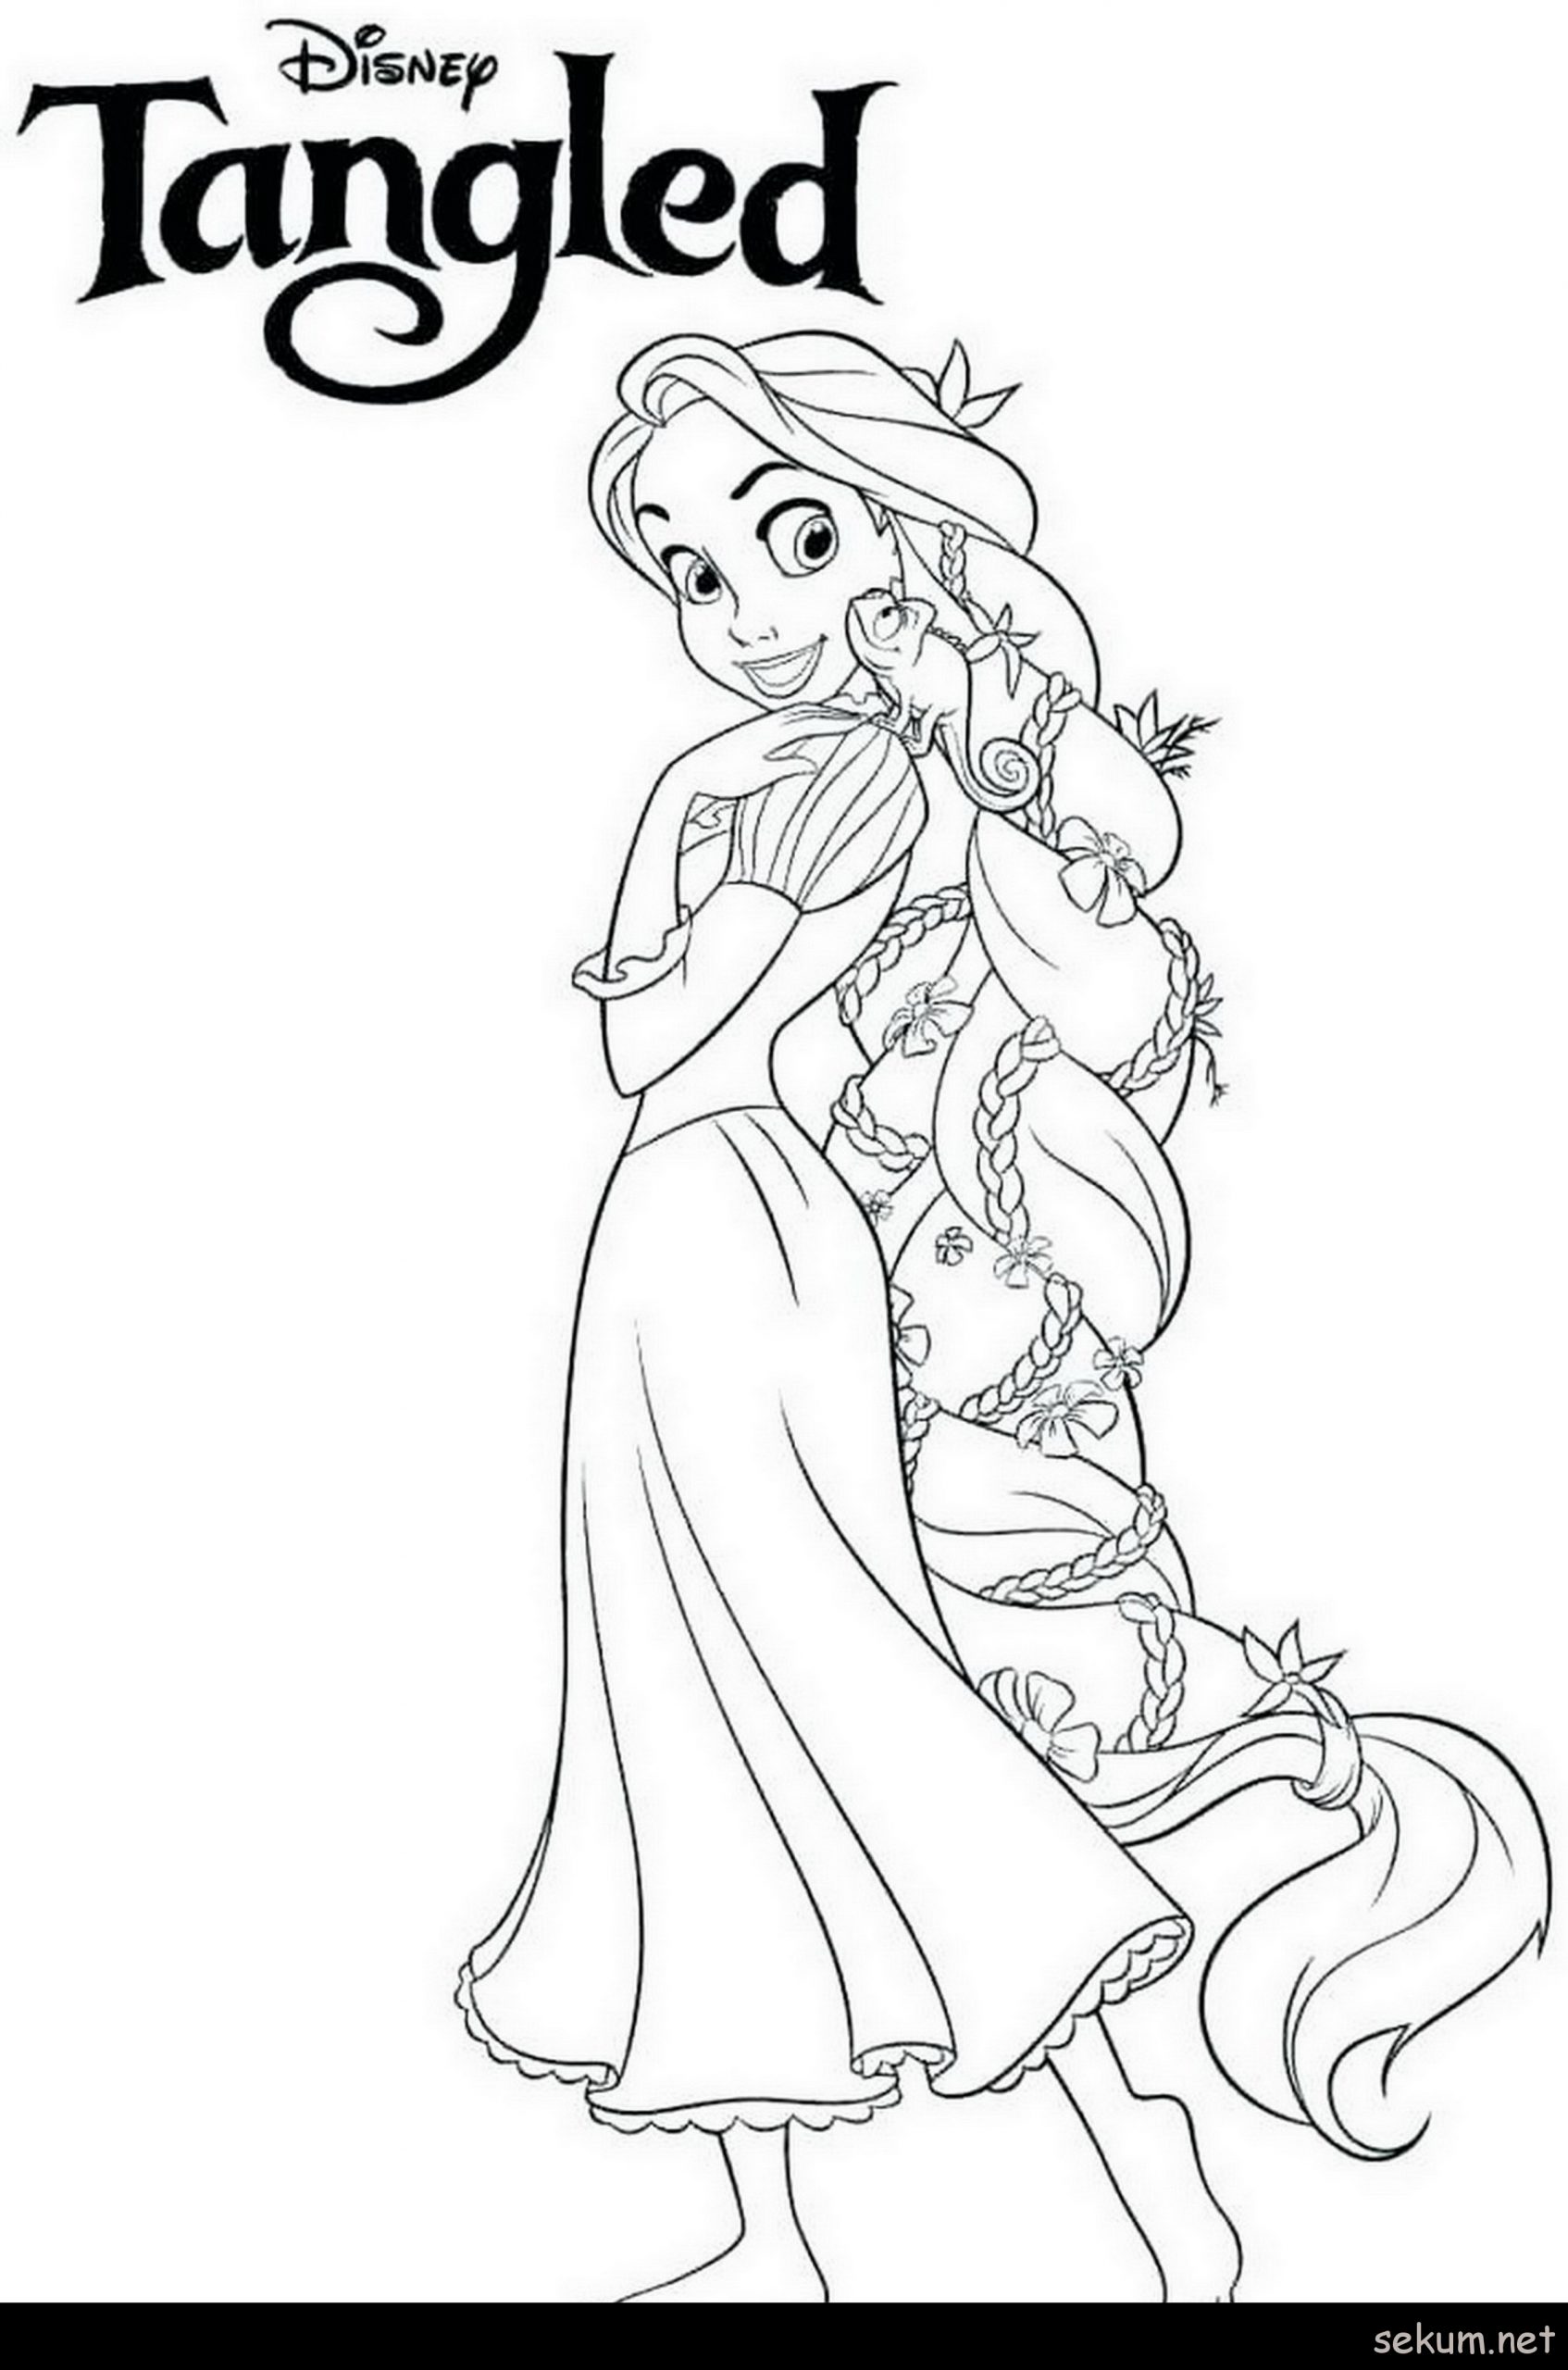 Download Princess Anna Coloring Pages - Coloring Home